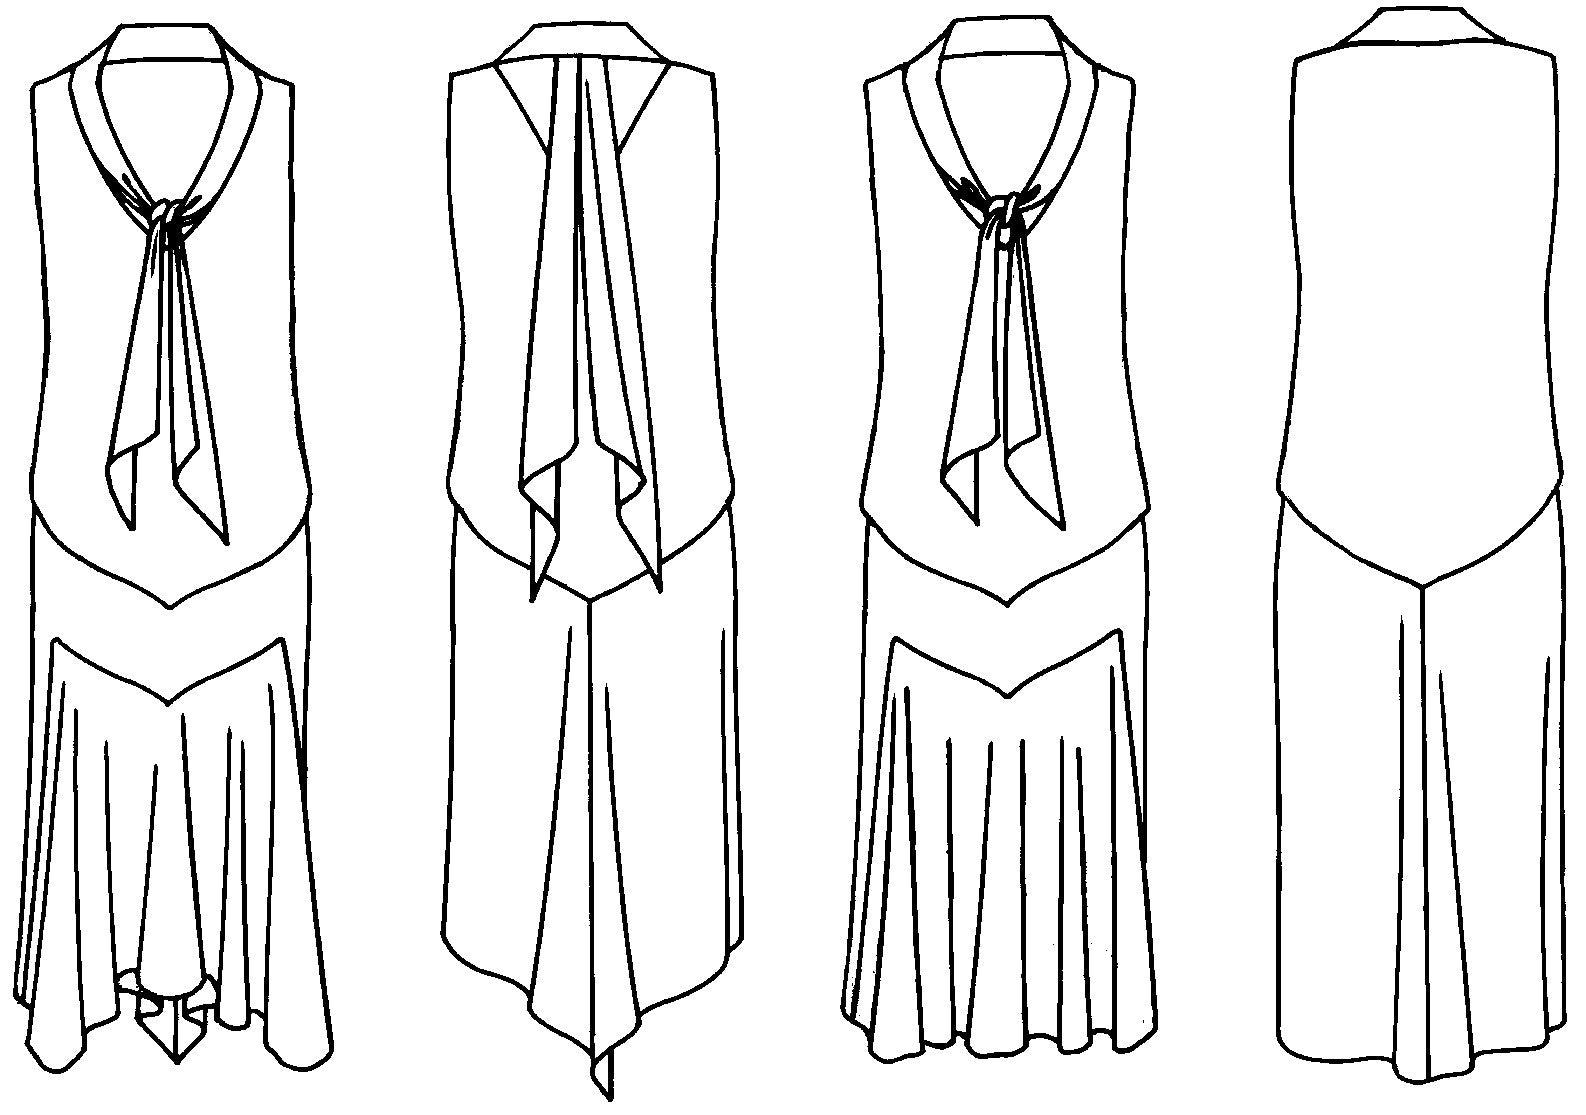 Black and white pattern drawing of front and back view of Dress View A and Dress View B. 